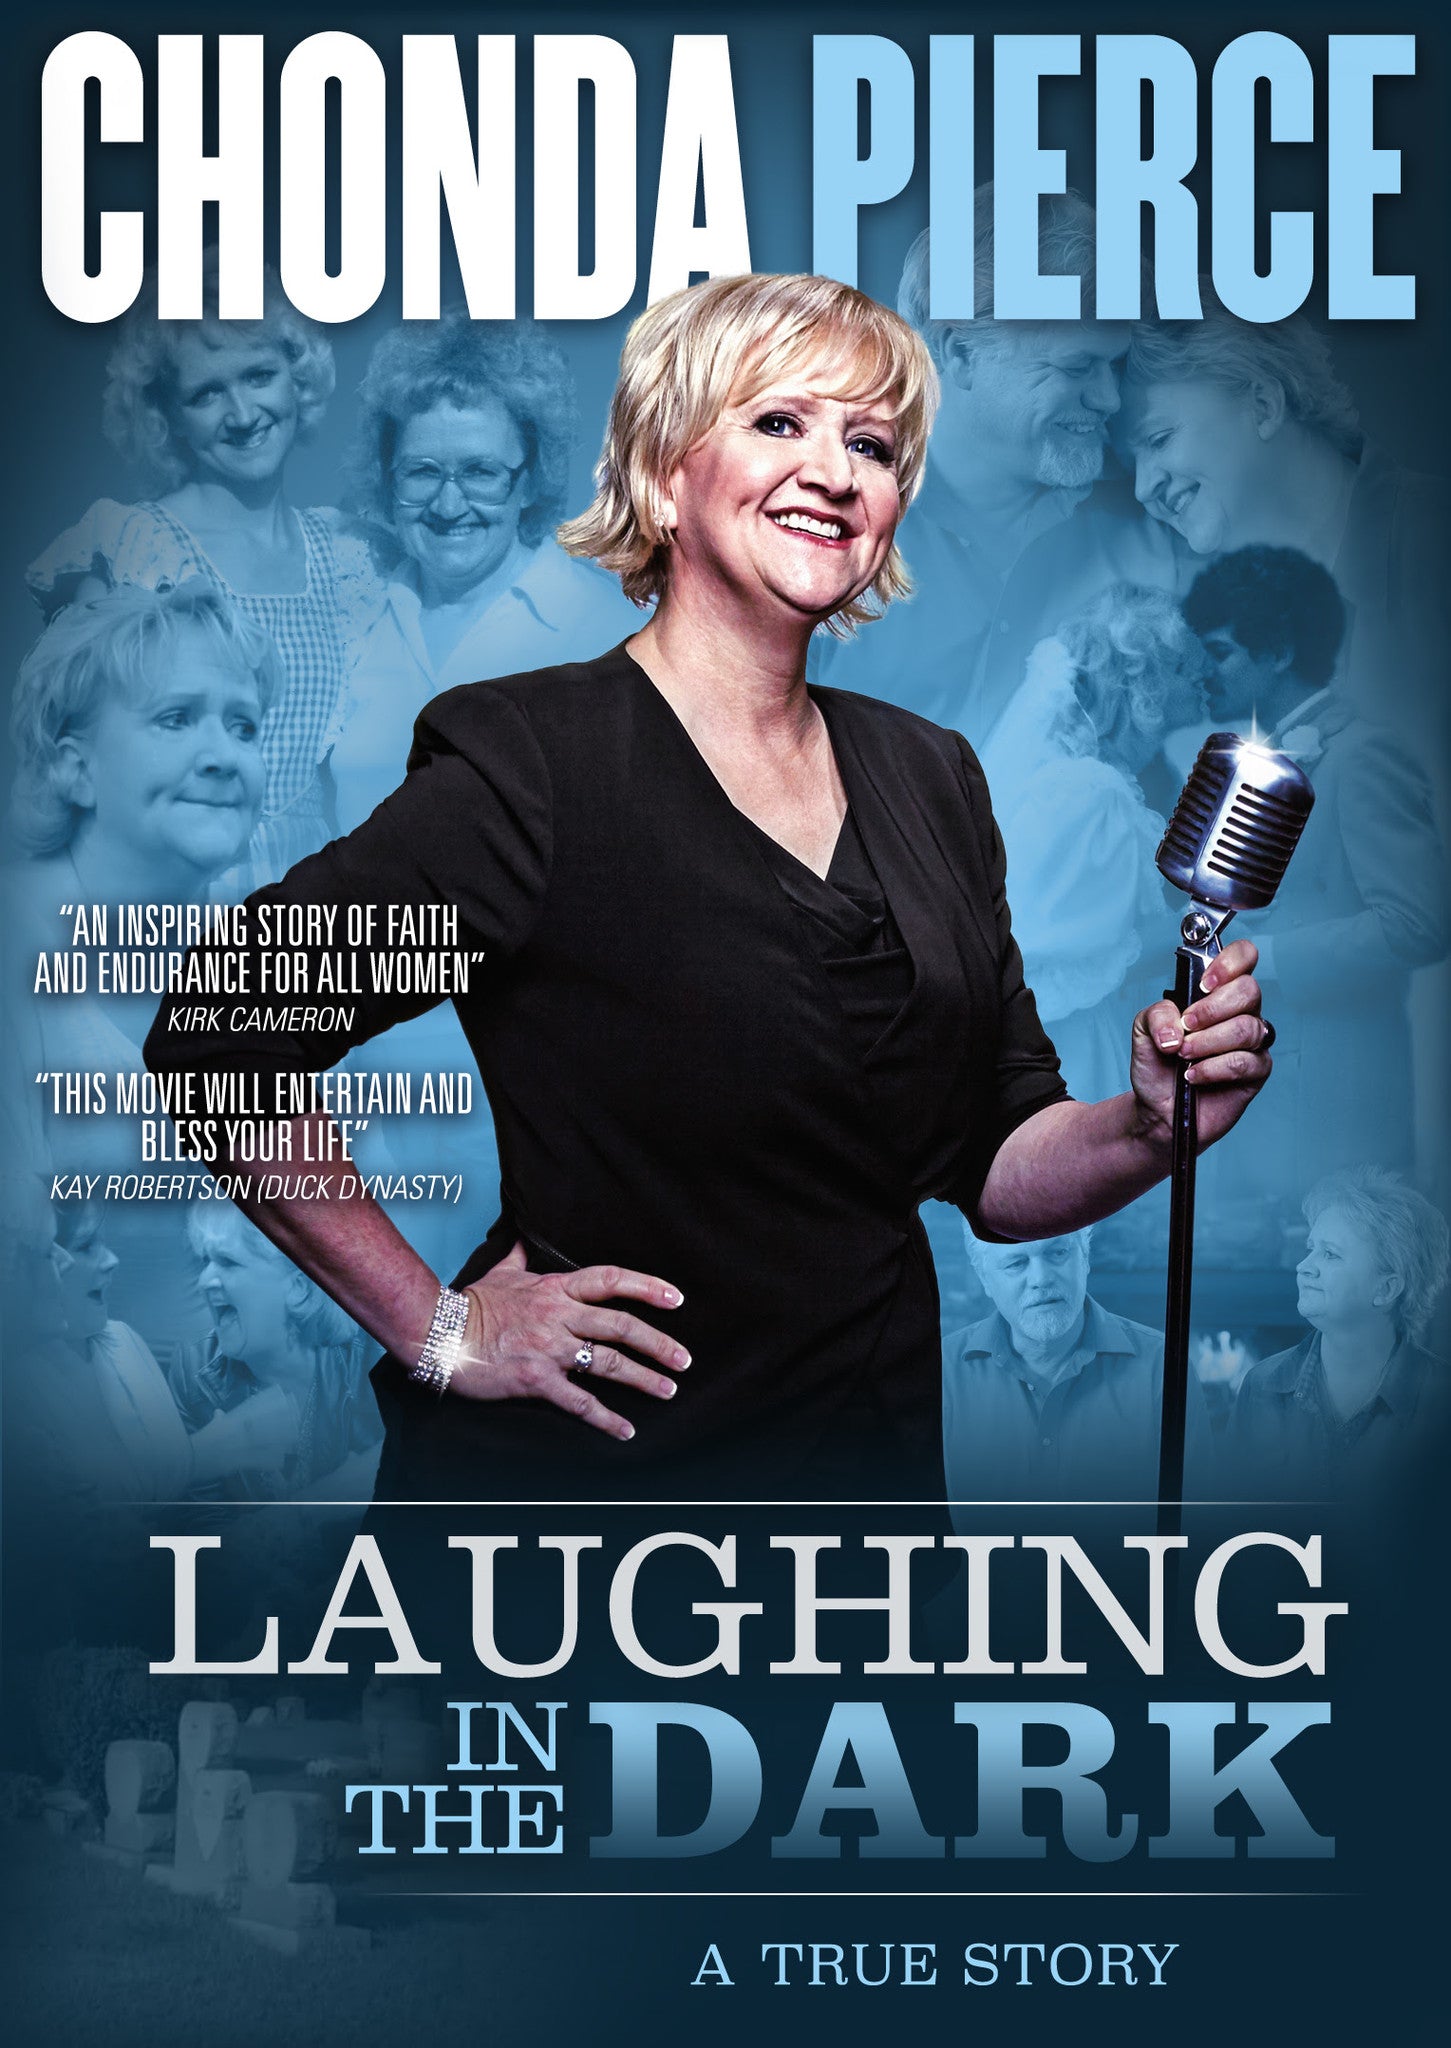 Laughing In The Dark: A True Story DVD